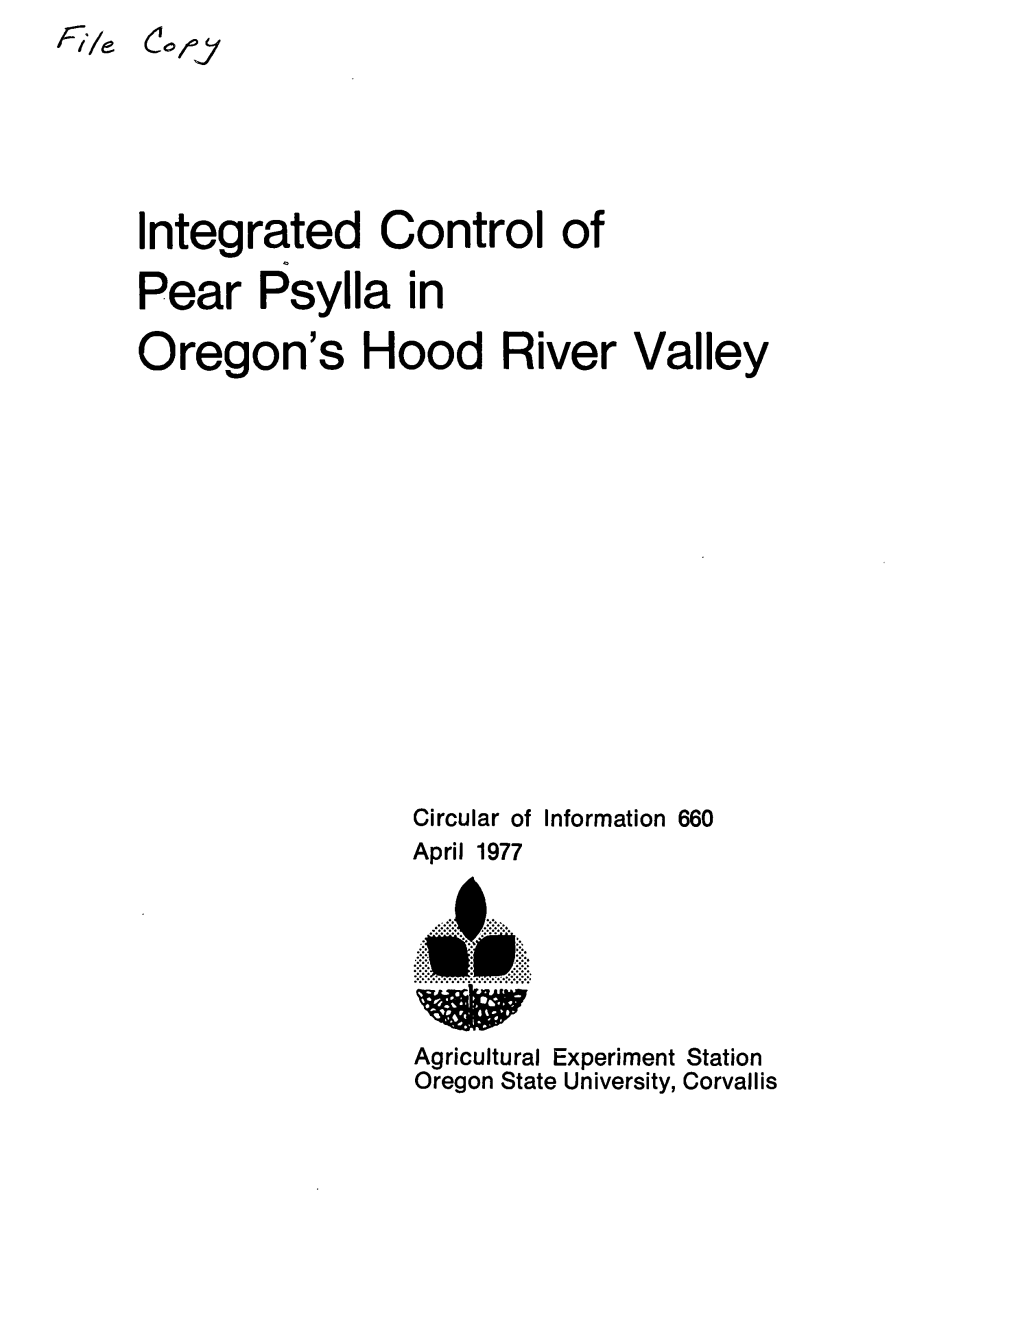 Integrated Control of Pear Psylla in Oregon's Hood River Valley